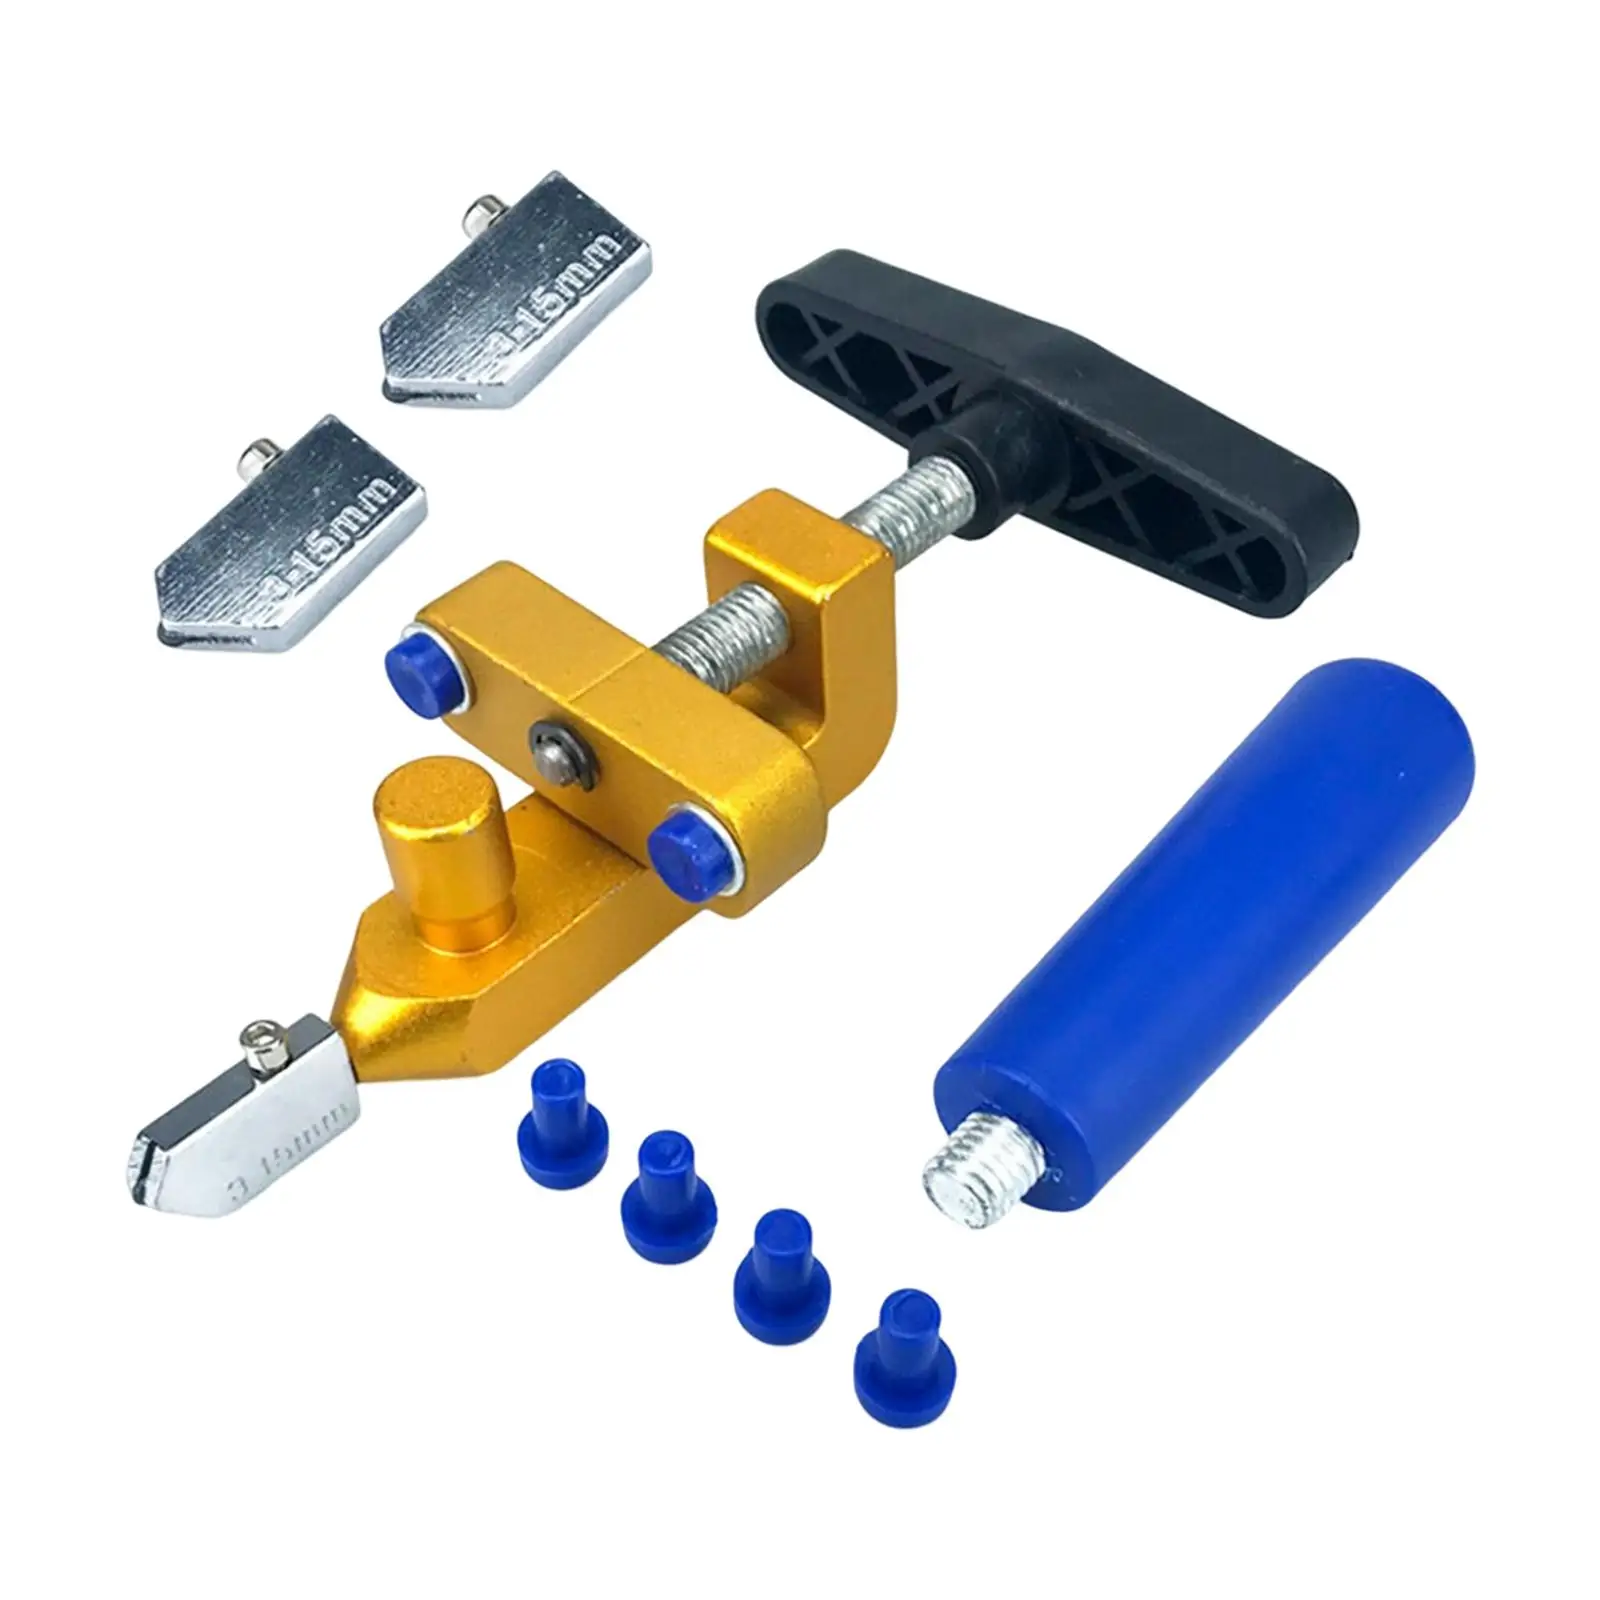 Manual Glass Cutter Cutting Machine Portable Lightweight Ceramic Tile Opener Mirror Cutting Kit for Ceramic Thick Glass Tiles